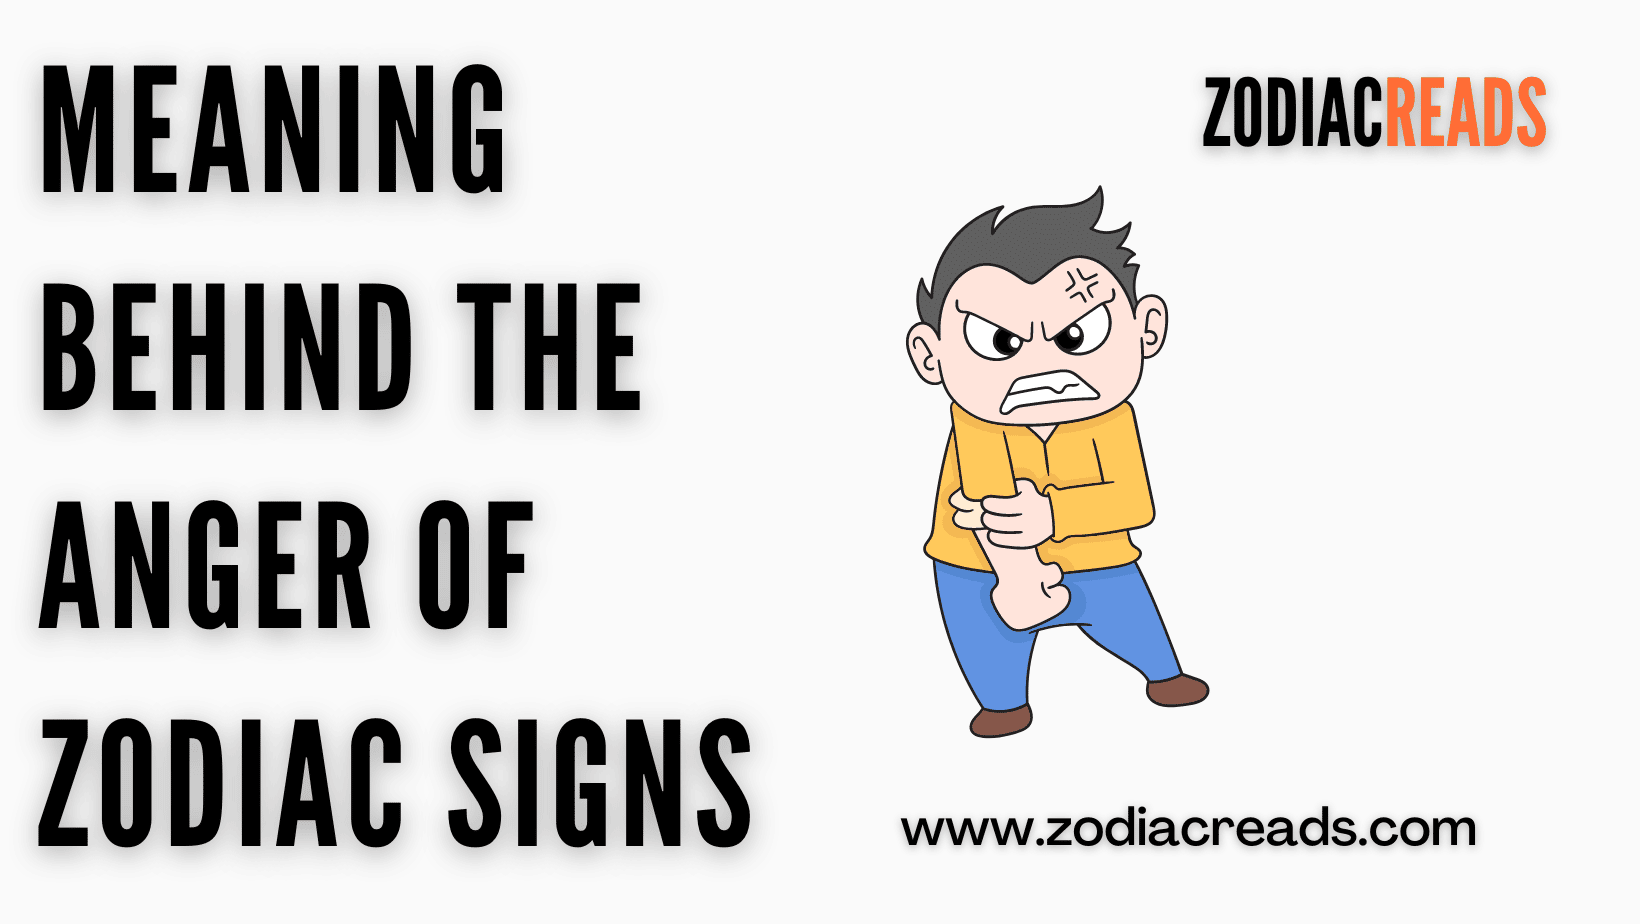 Meaning behind the anger of zodiac signs